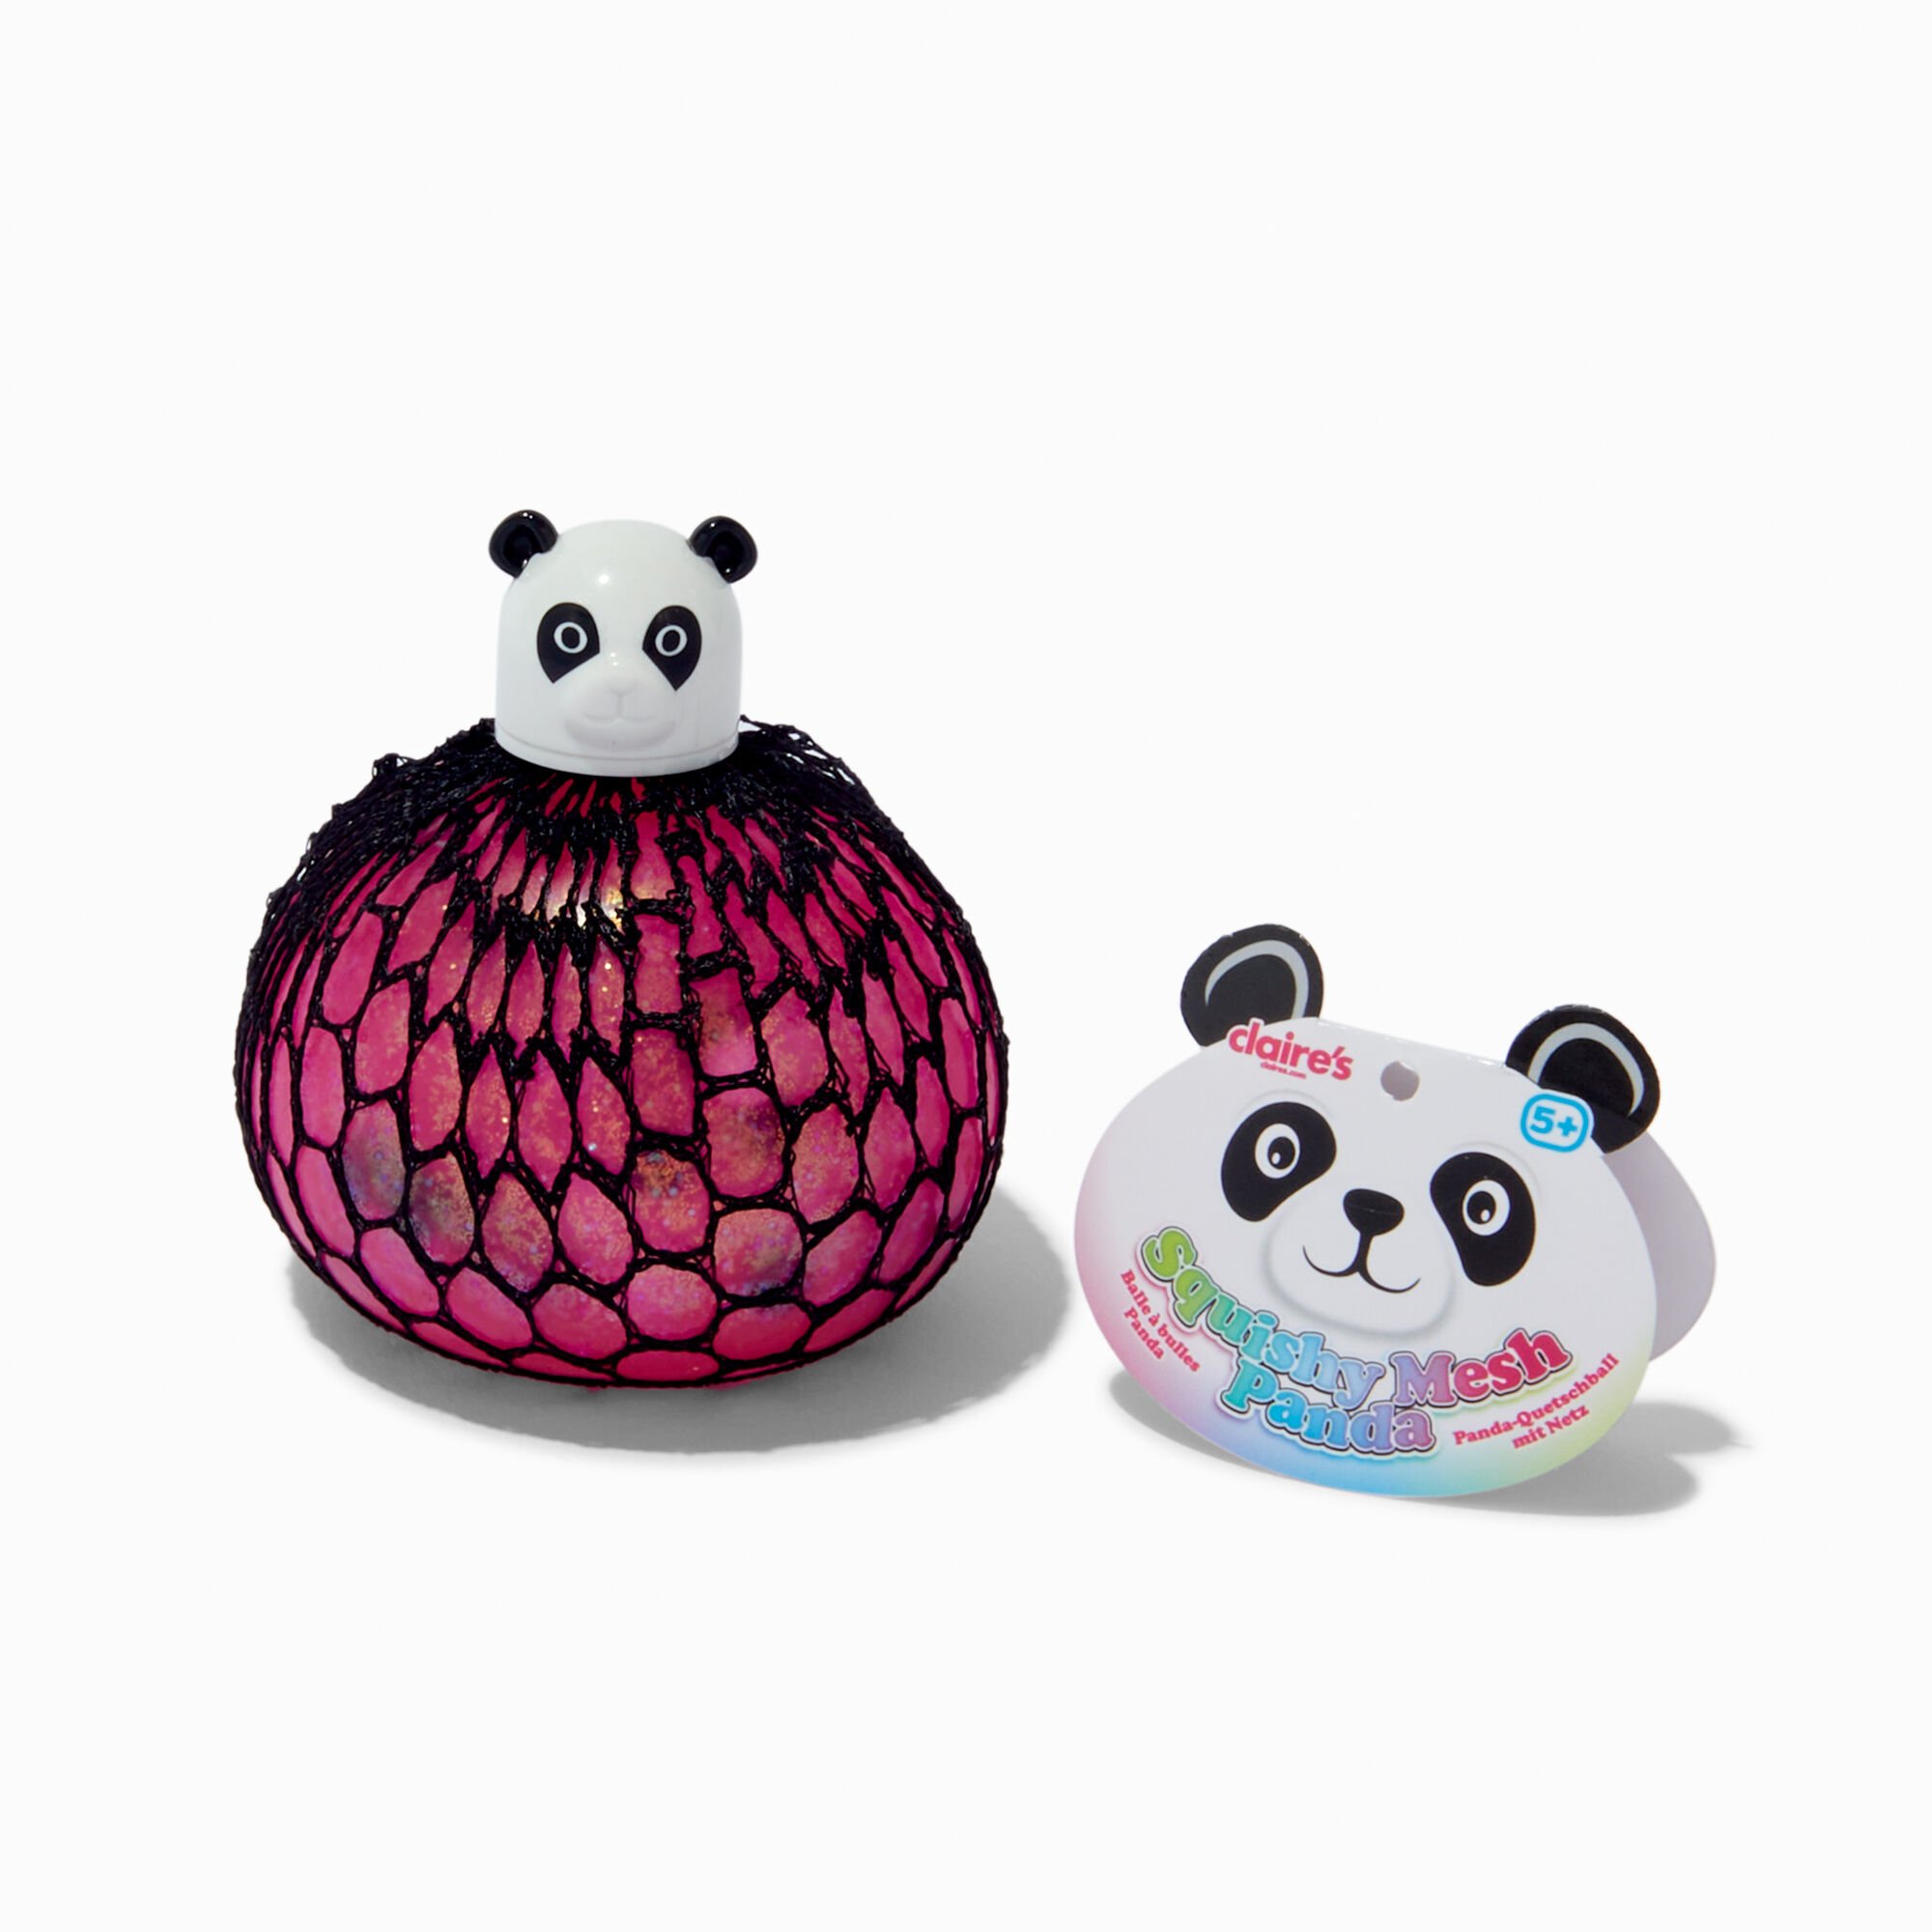 View Claires Panda Squishy Mesh Ball Fidget Toy Styles Vary information